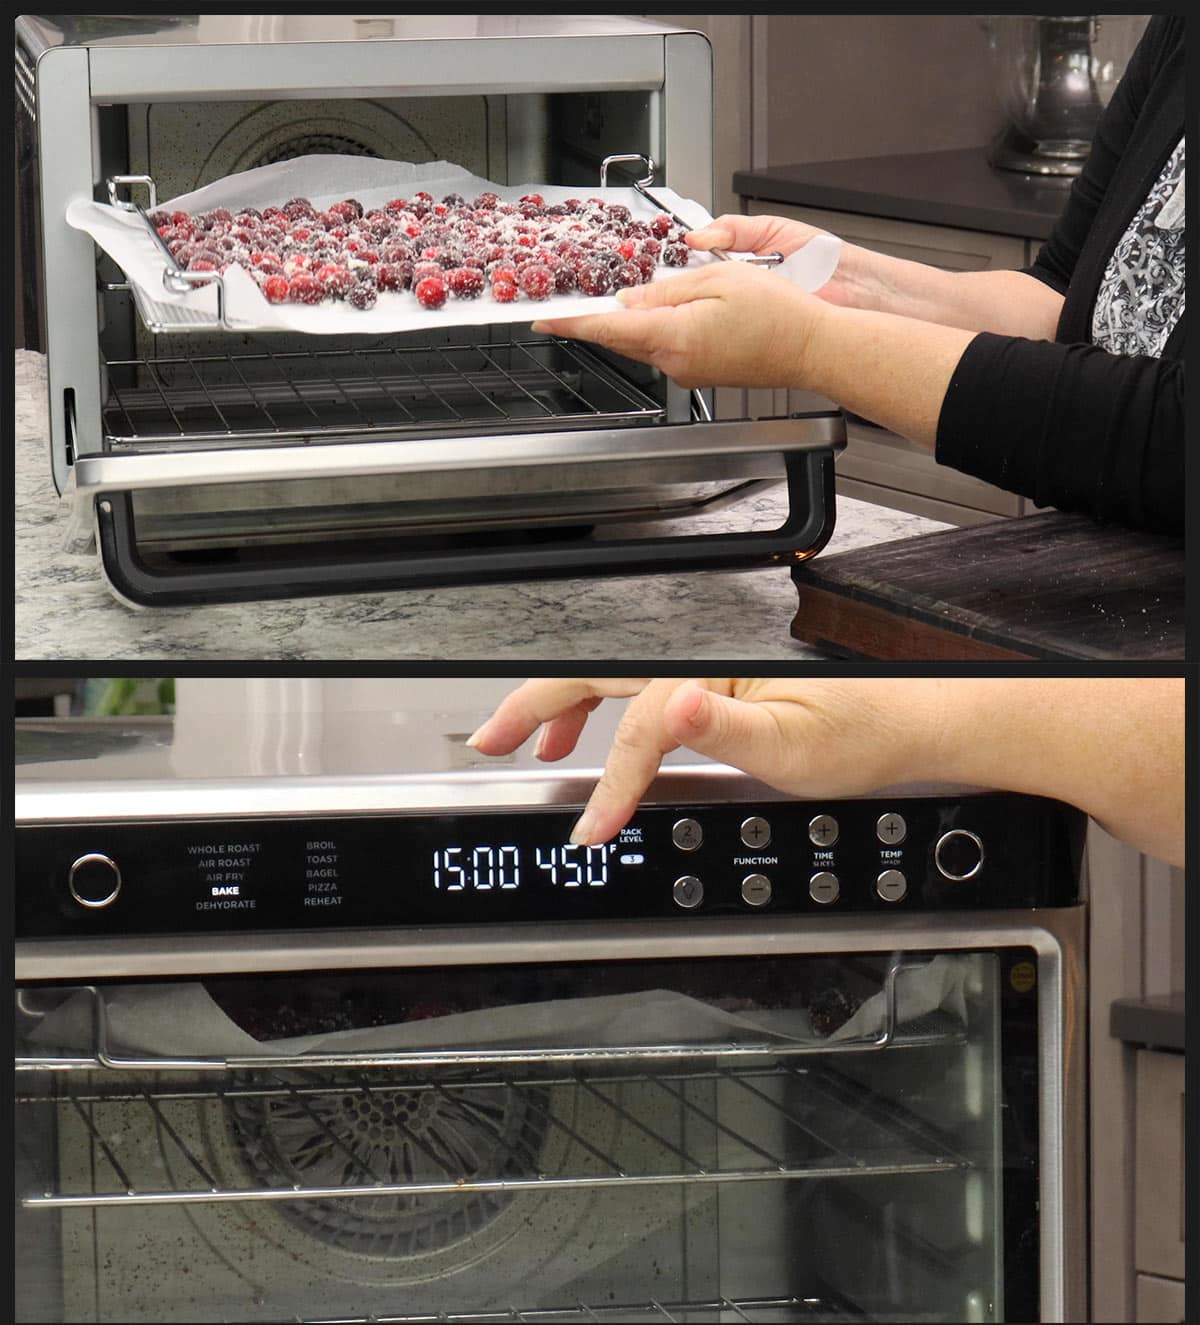 Baking at 450℉ to burst the cranberries.